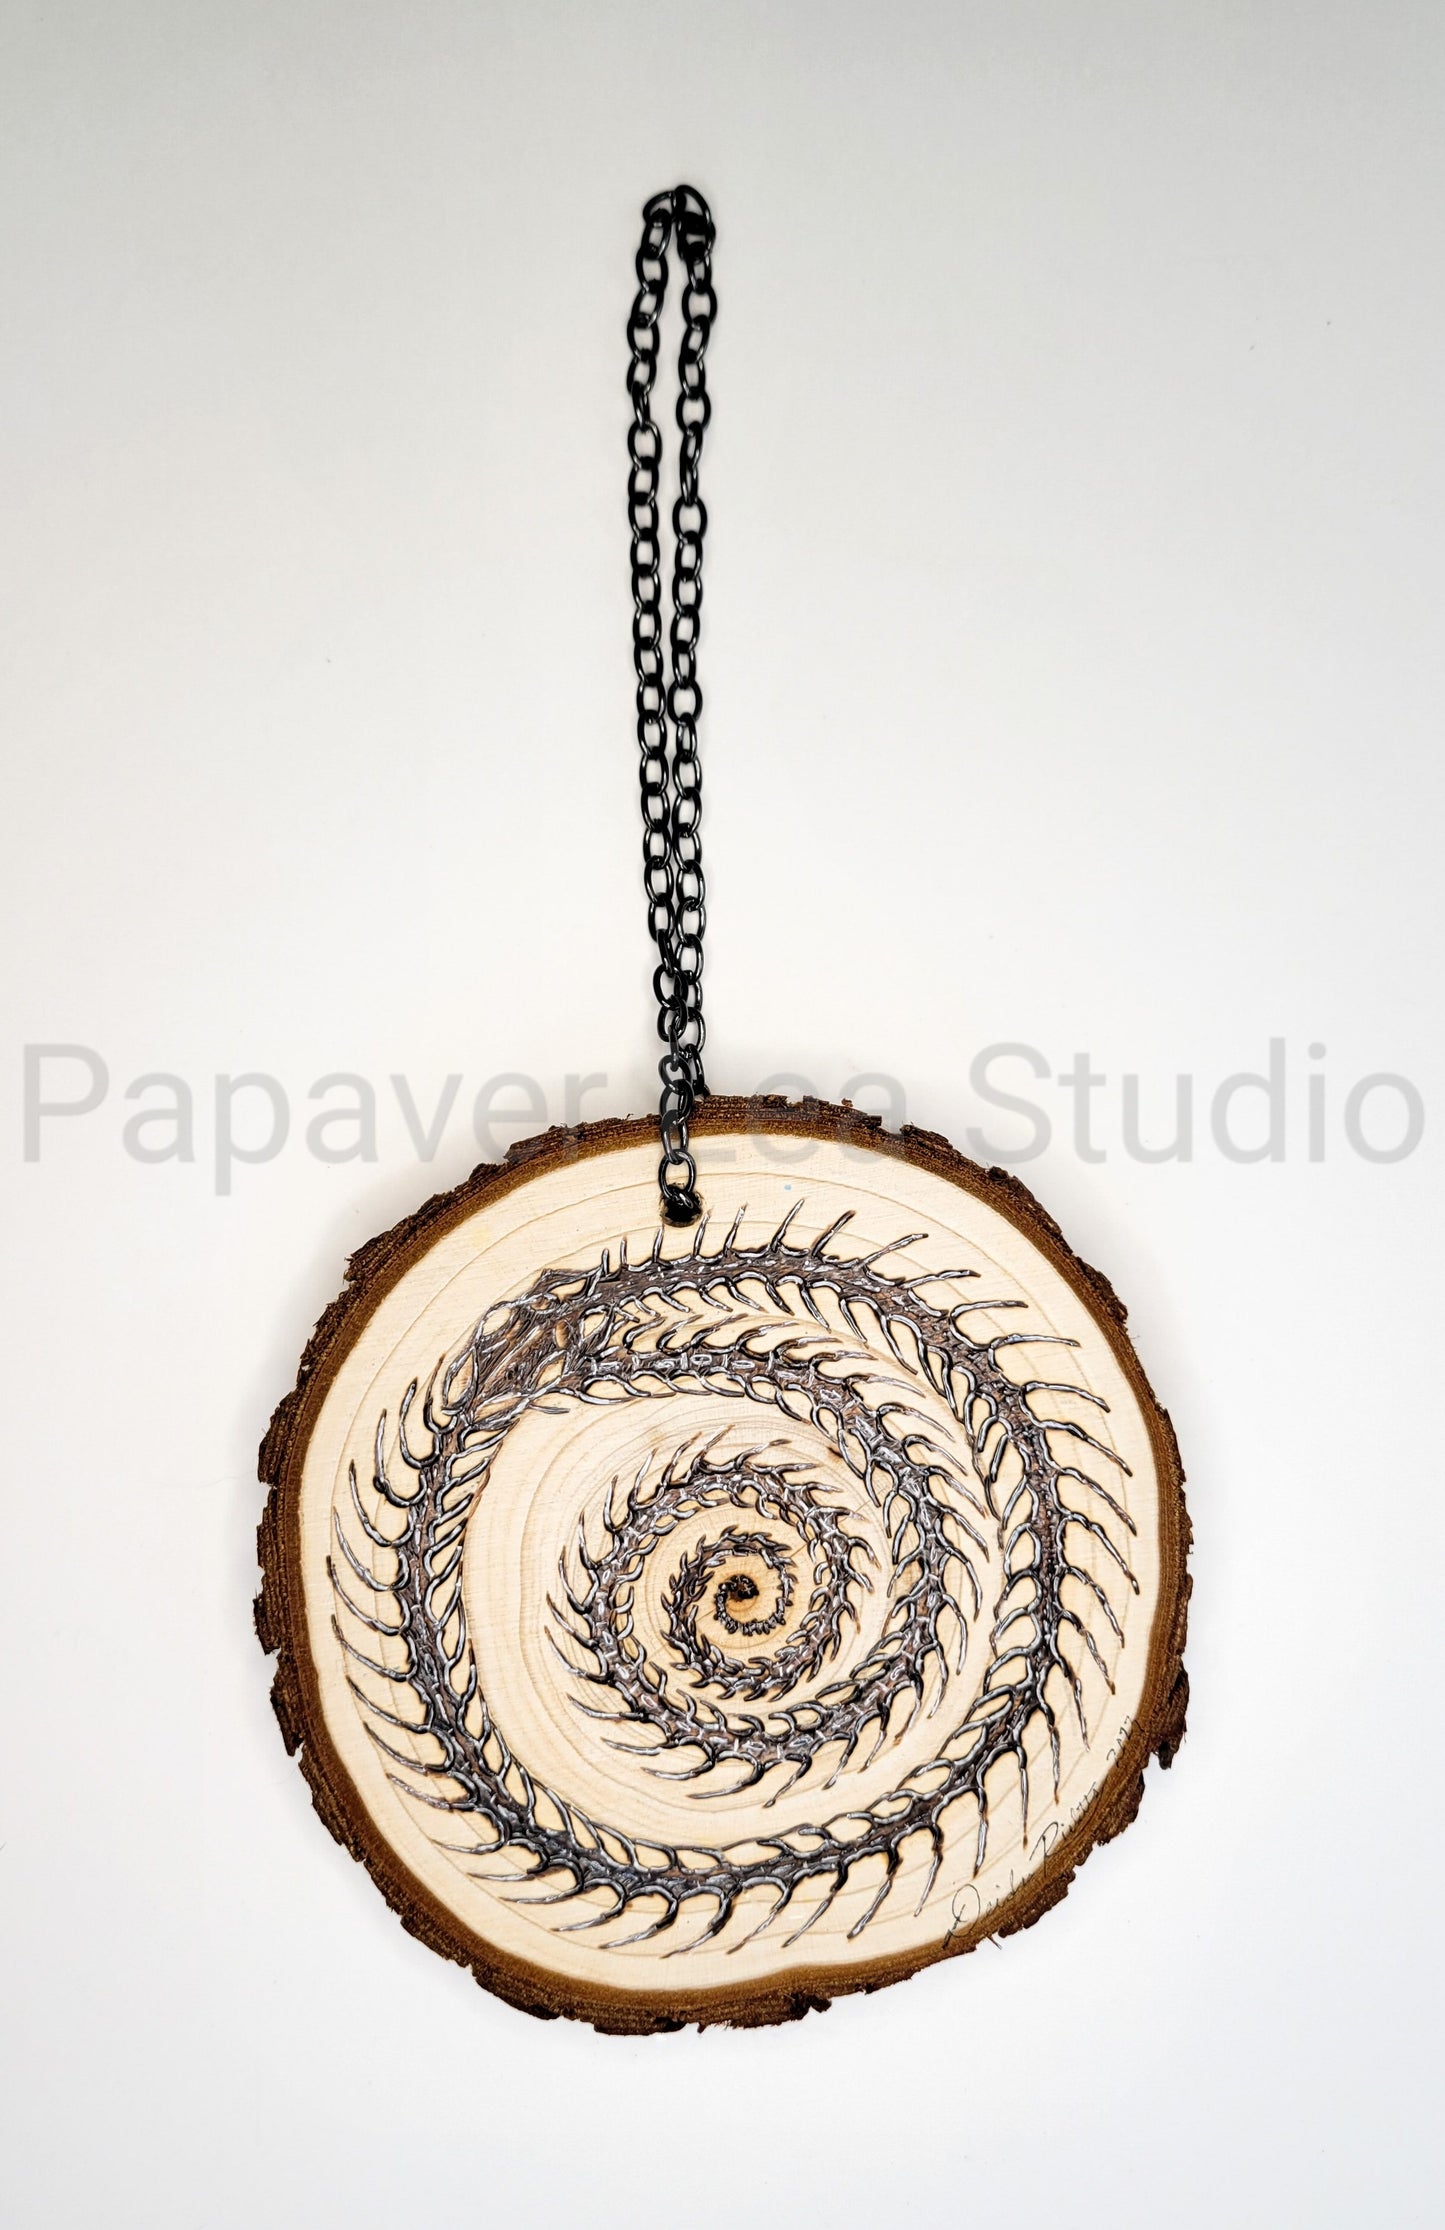 Fossil Ouroboros Large Ornament